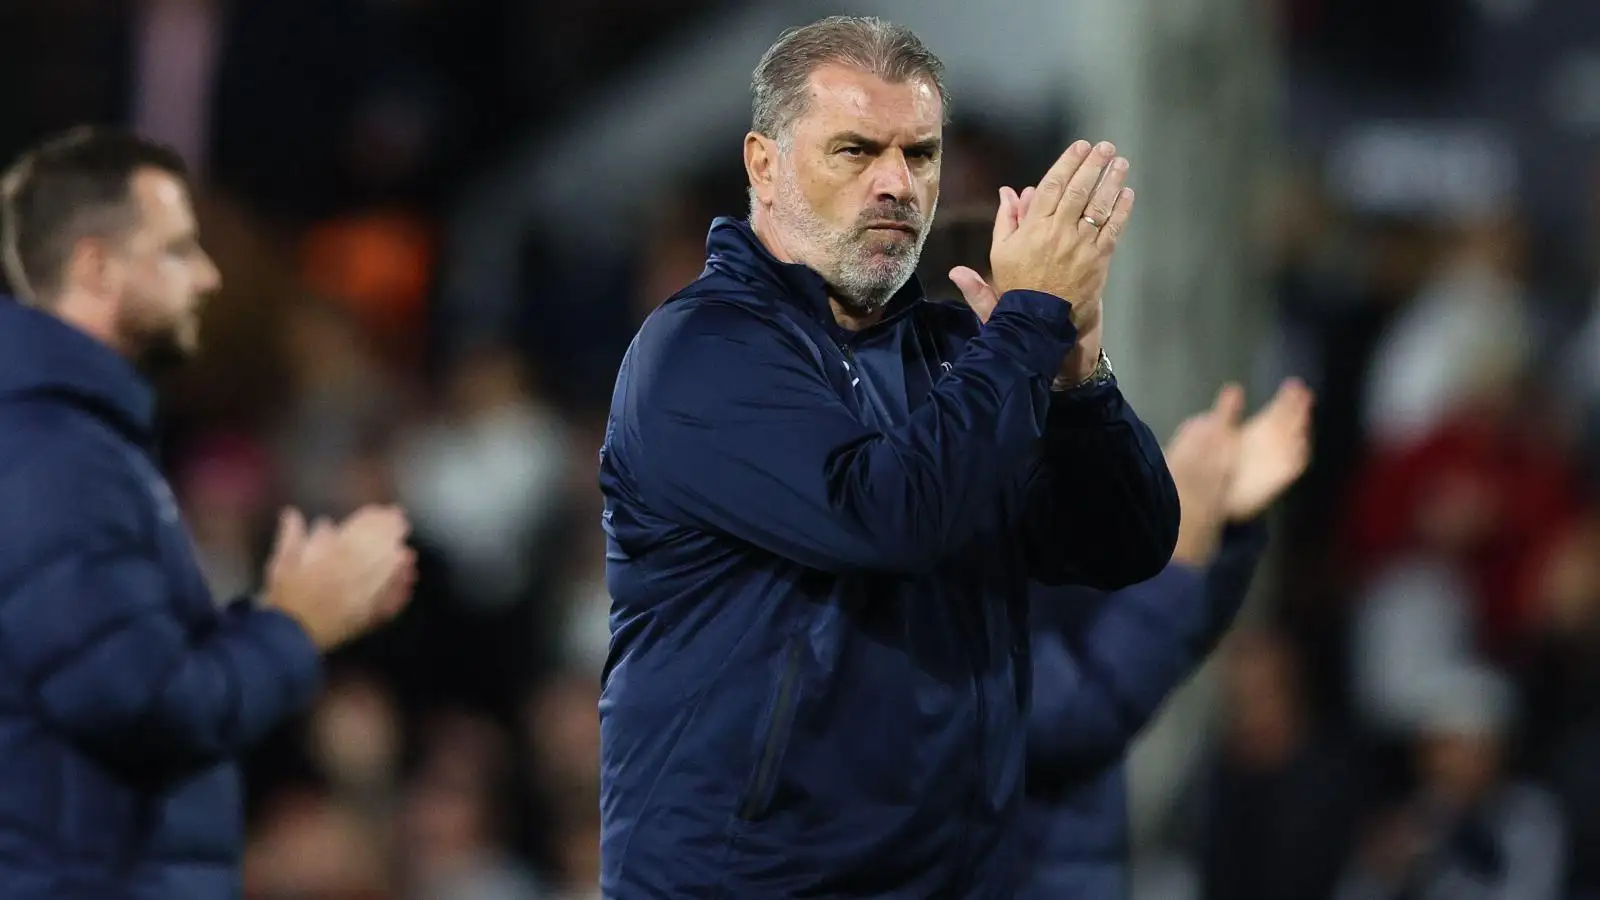 Ange Postecoglou applauds the fans after a defeat.